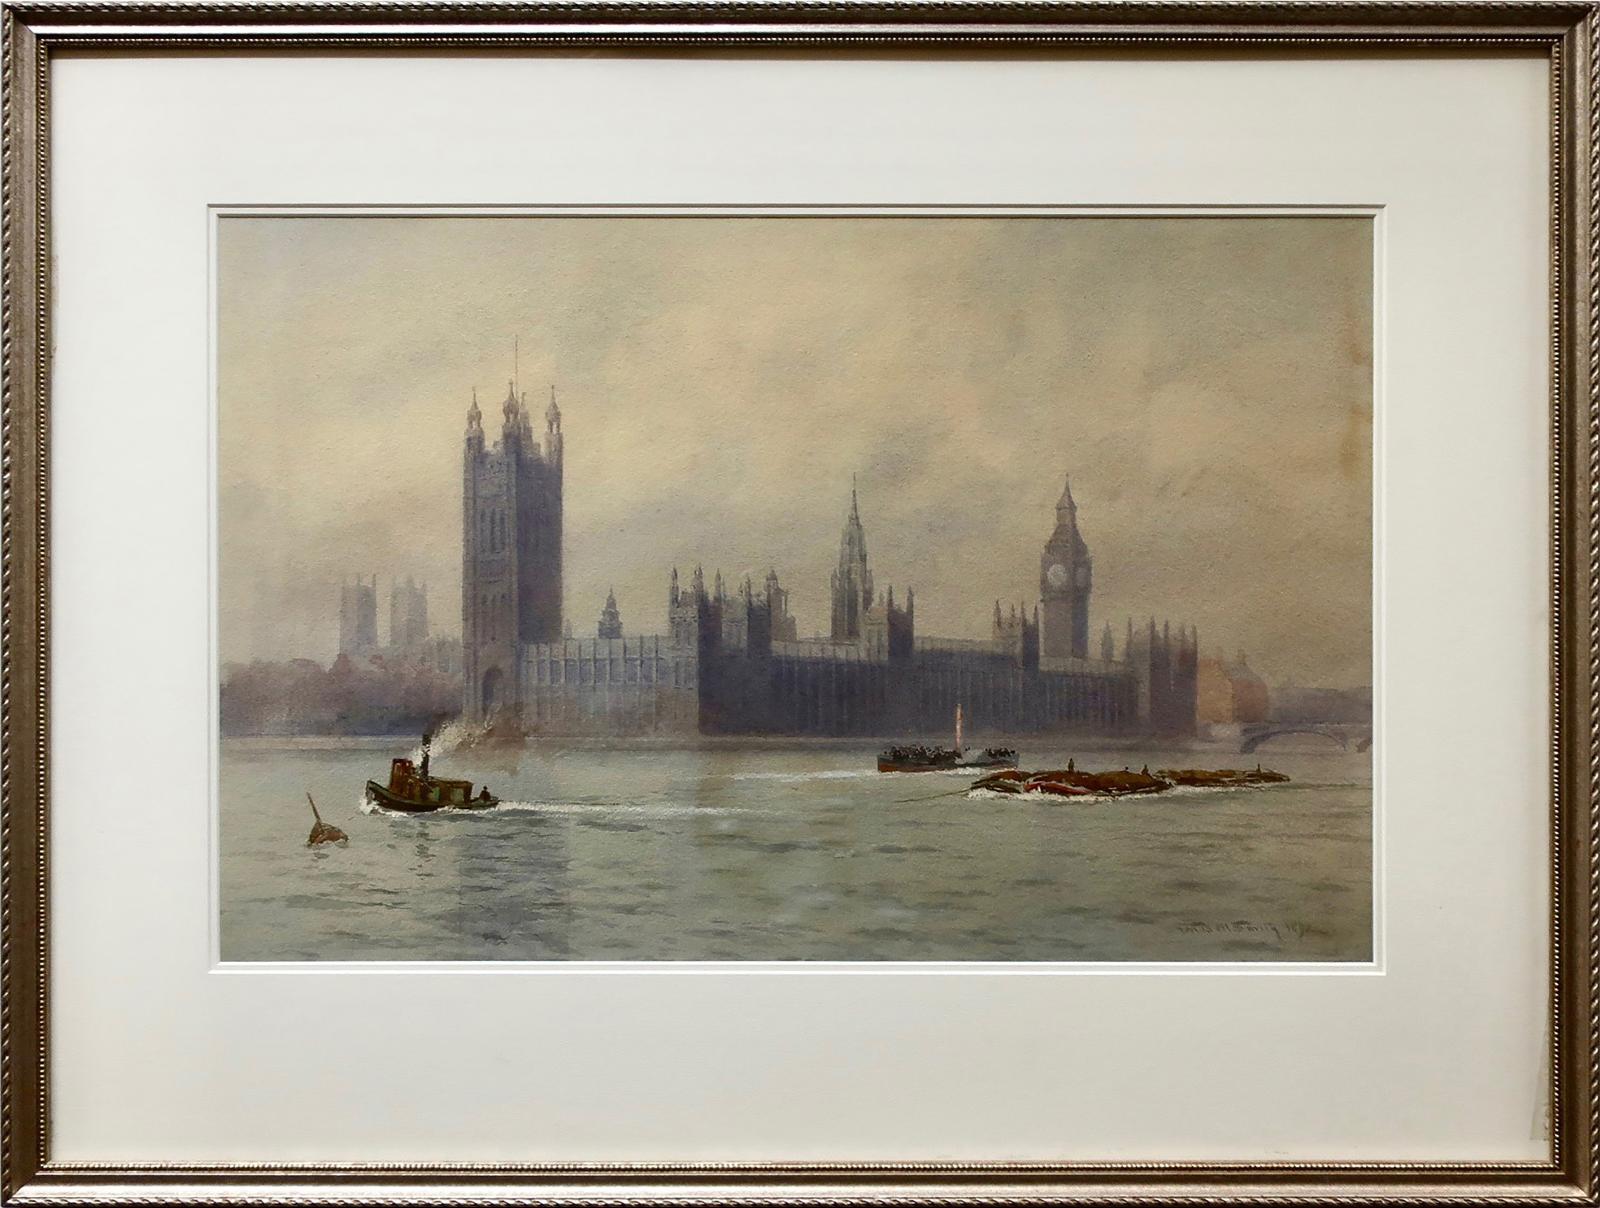 Frederic Martlett Bell-Smith (1846-1923) - Palace Of Westminster, London